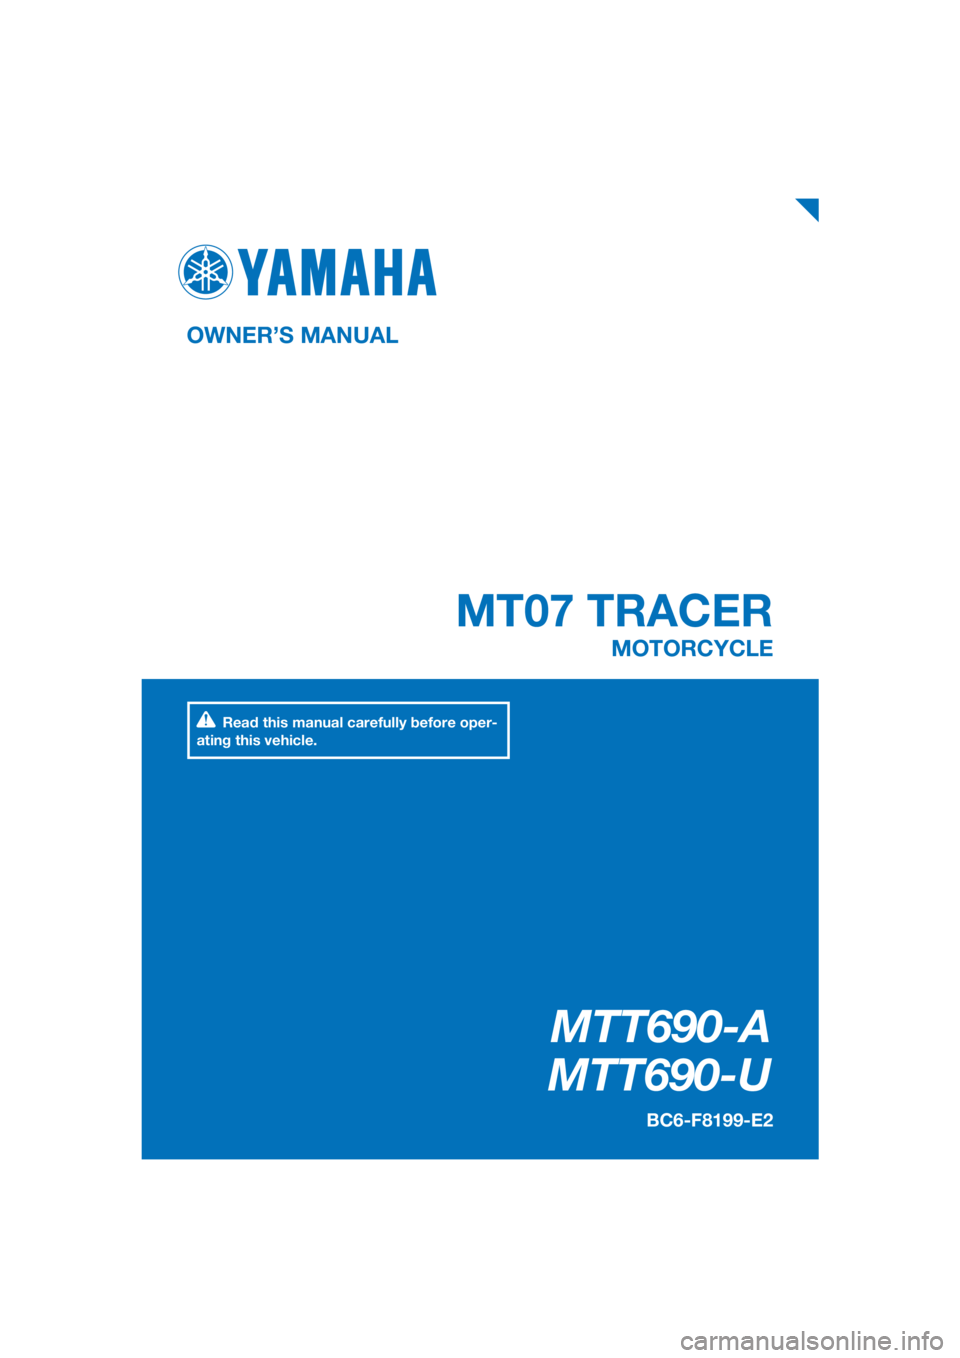 YAMAHA TRACER 700 2018  Owners Manual PANTONE285C
MTT690-A
MTT690-U
MT07 TRACER
OWNER’S MANUAL
BC6-F8199-E2
MOTORCYCLE
[English  (E)]
Read this manual carefully before oper-
ating this vehicle. 